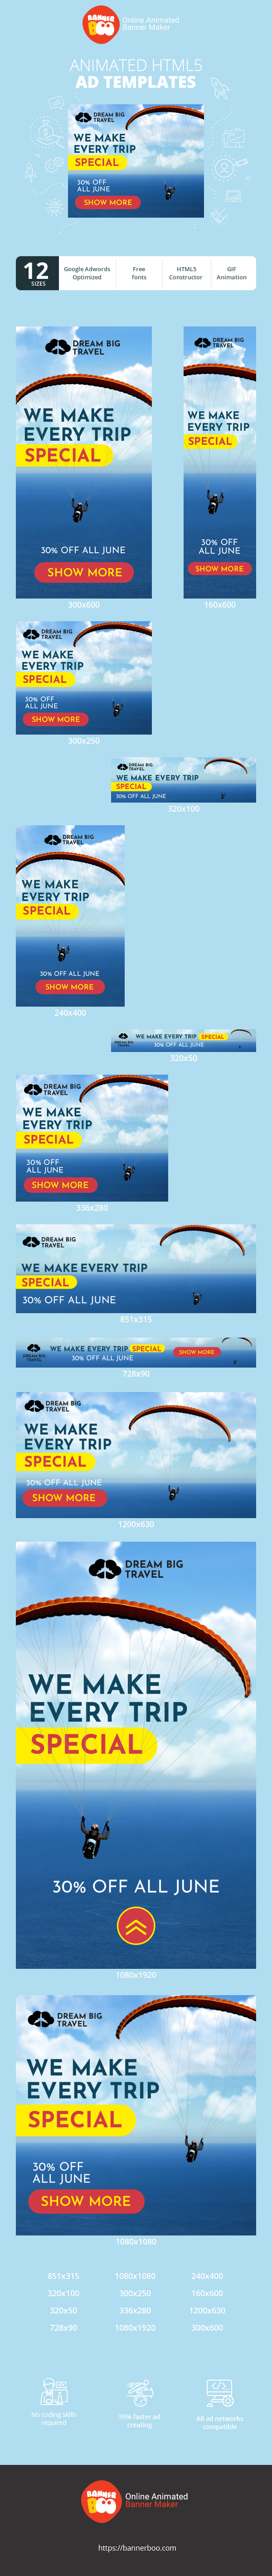 Banner ad template — We Make Every Trip Special — 30% Off All June